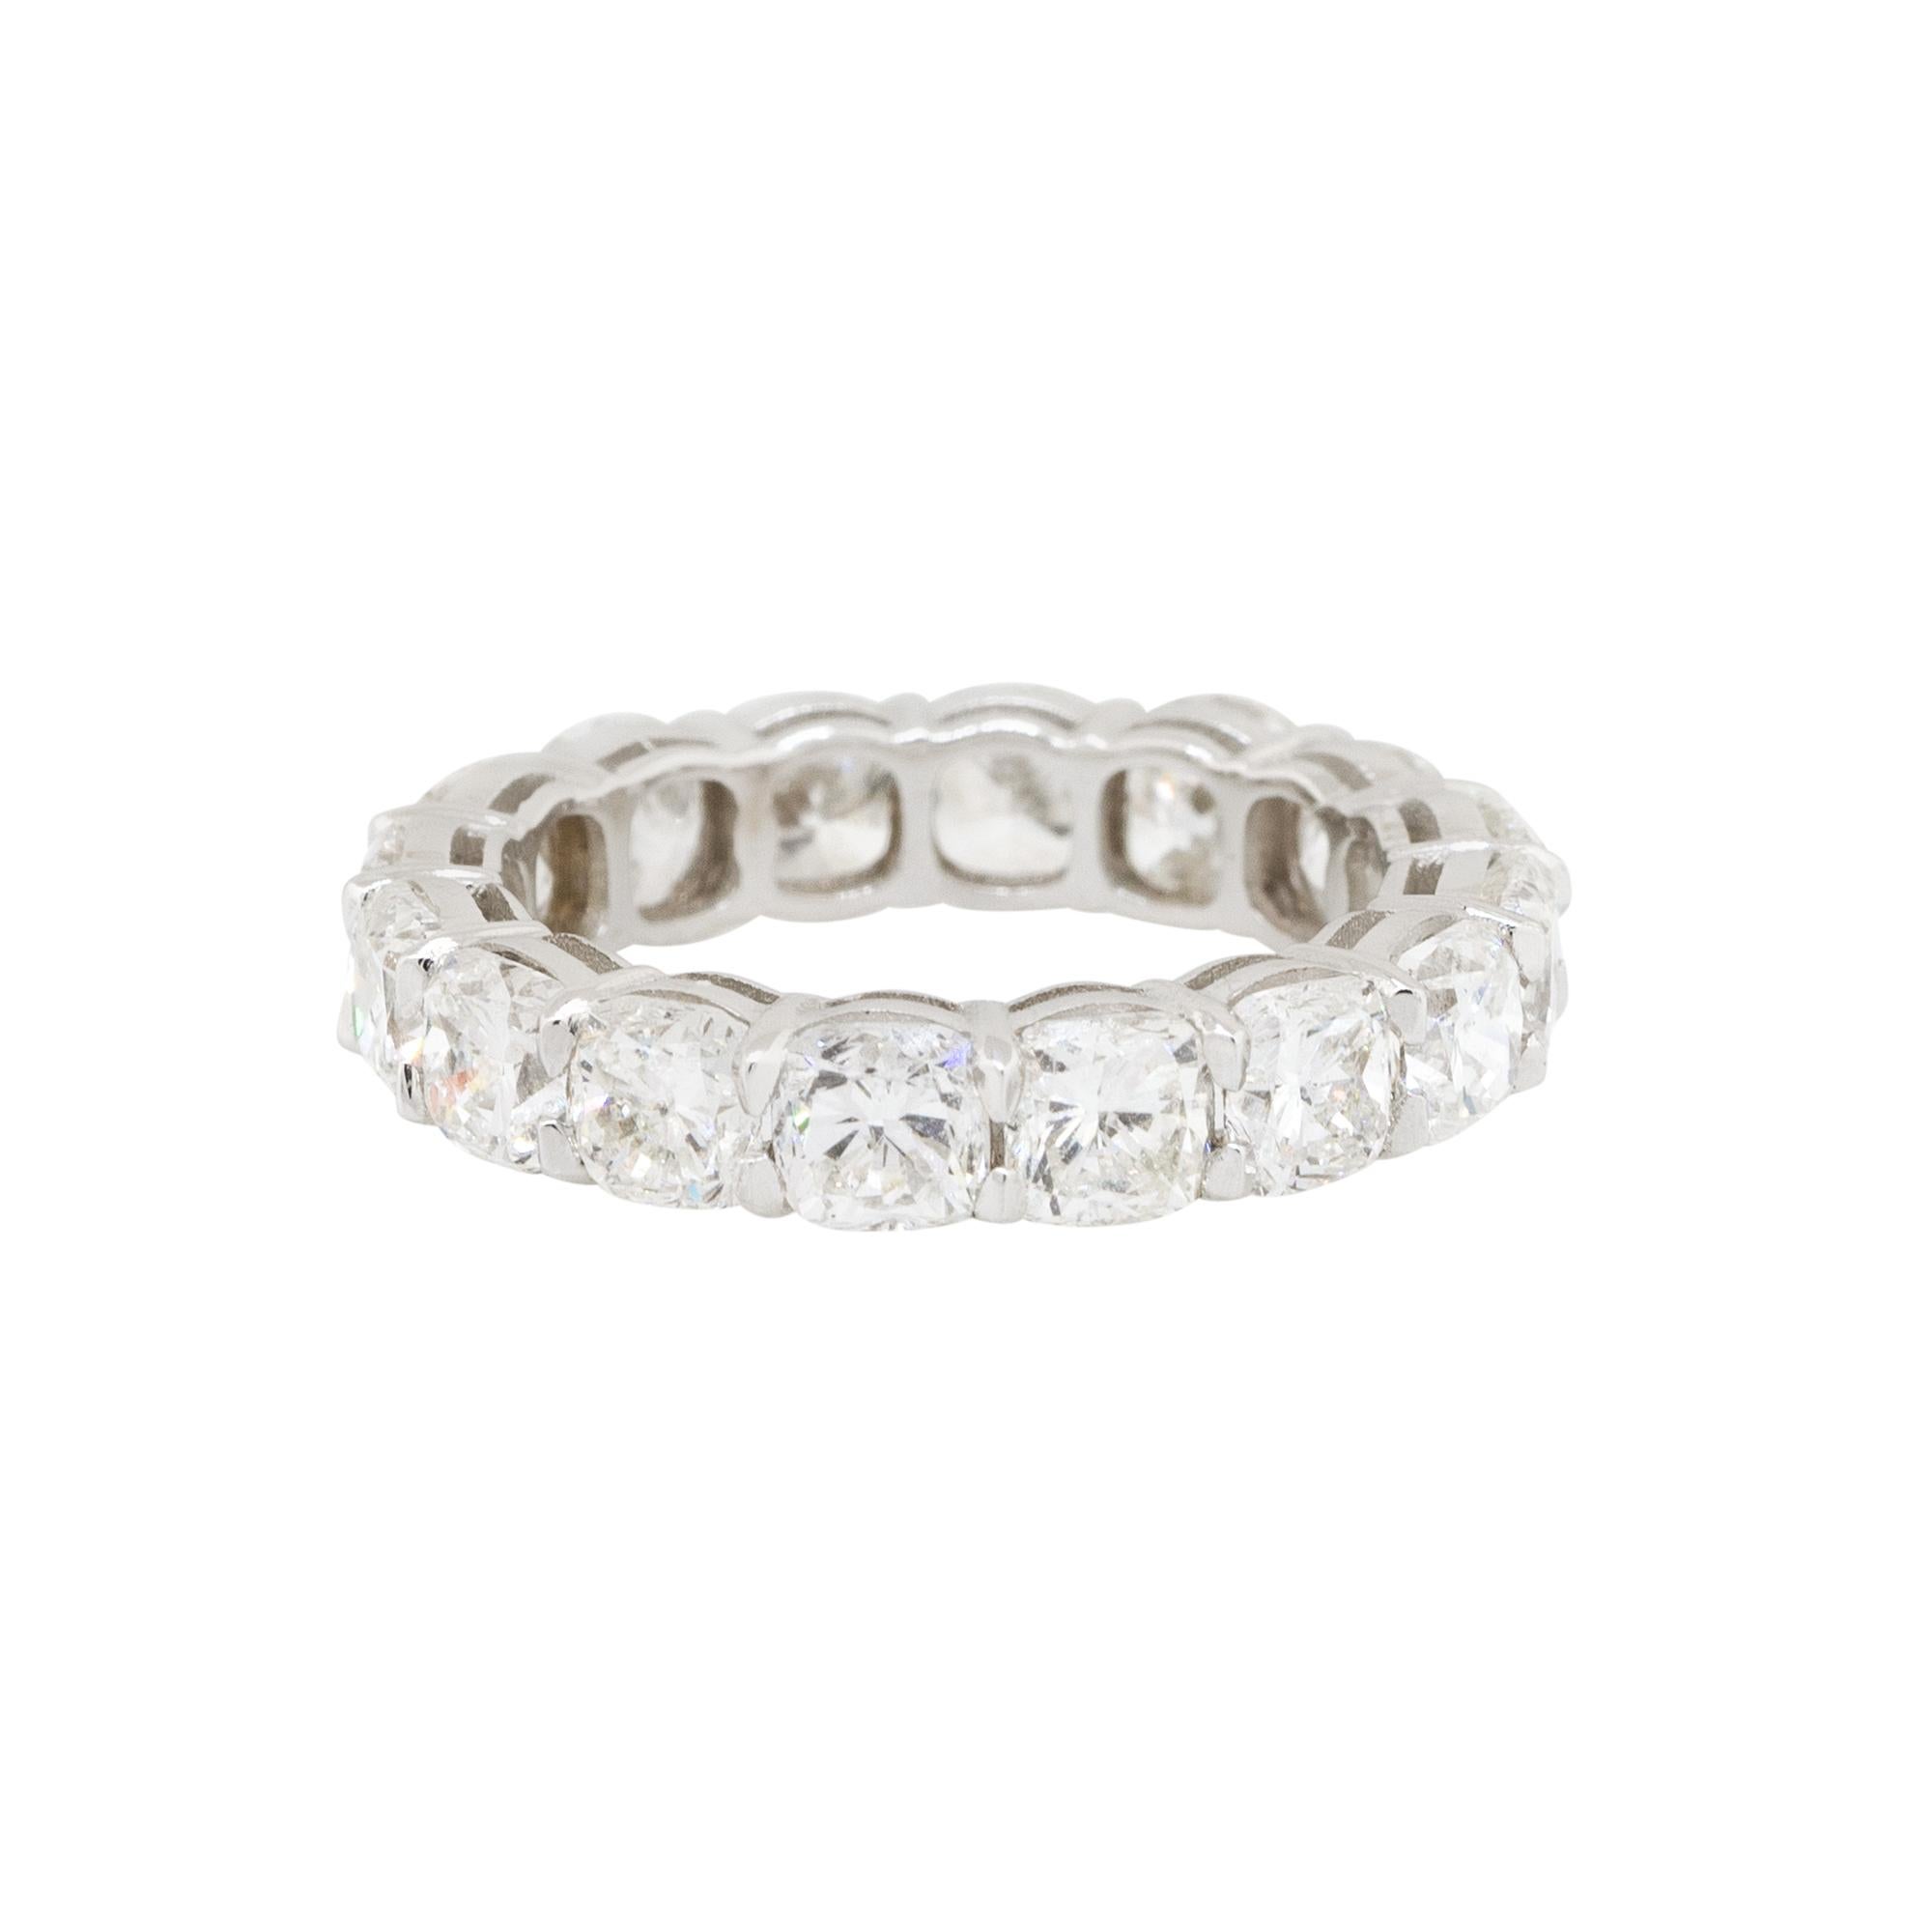 18k White Gold 6.71ctw Cushion Cut Diamond Eternity Band

Material: 18k White Gold
Diamond Details: Approx. 6.71ctw of Cushion cut Diamonds. There are 16 Diamonds total and all Diamonds are prong set. Diamonds are G/H in Color and VS in